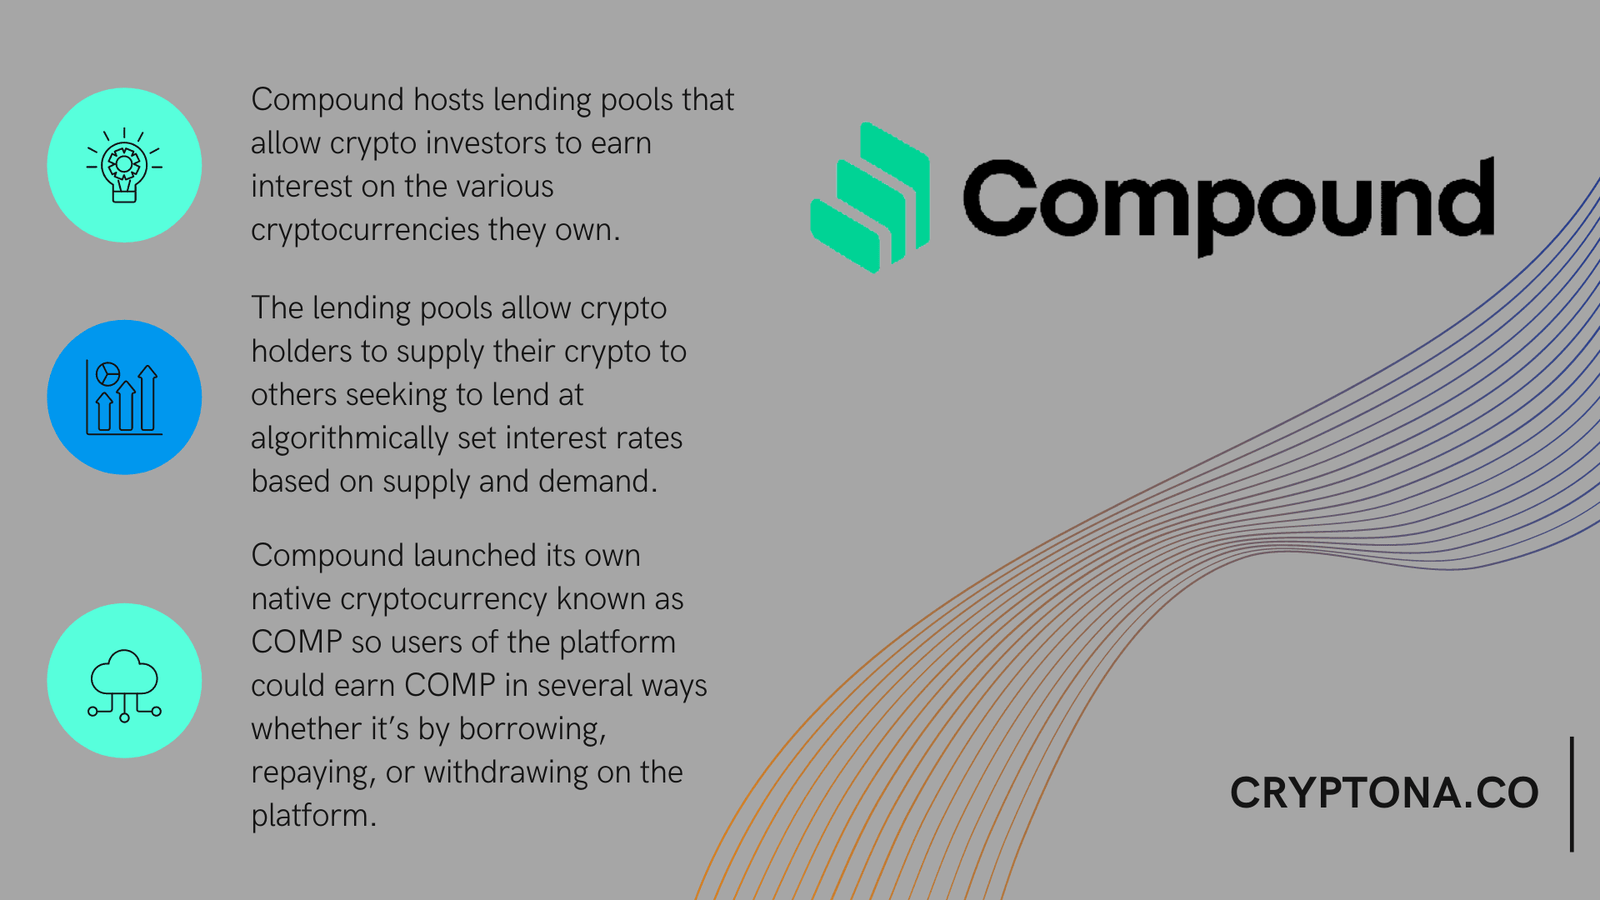 What is Compound?